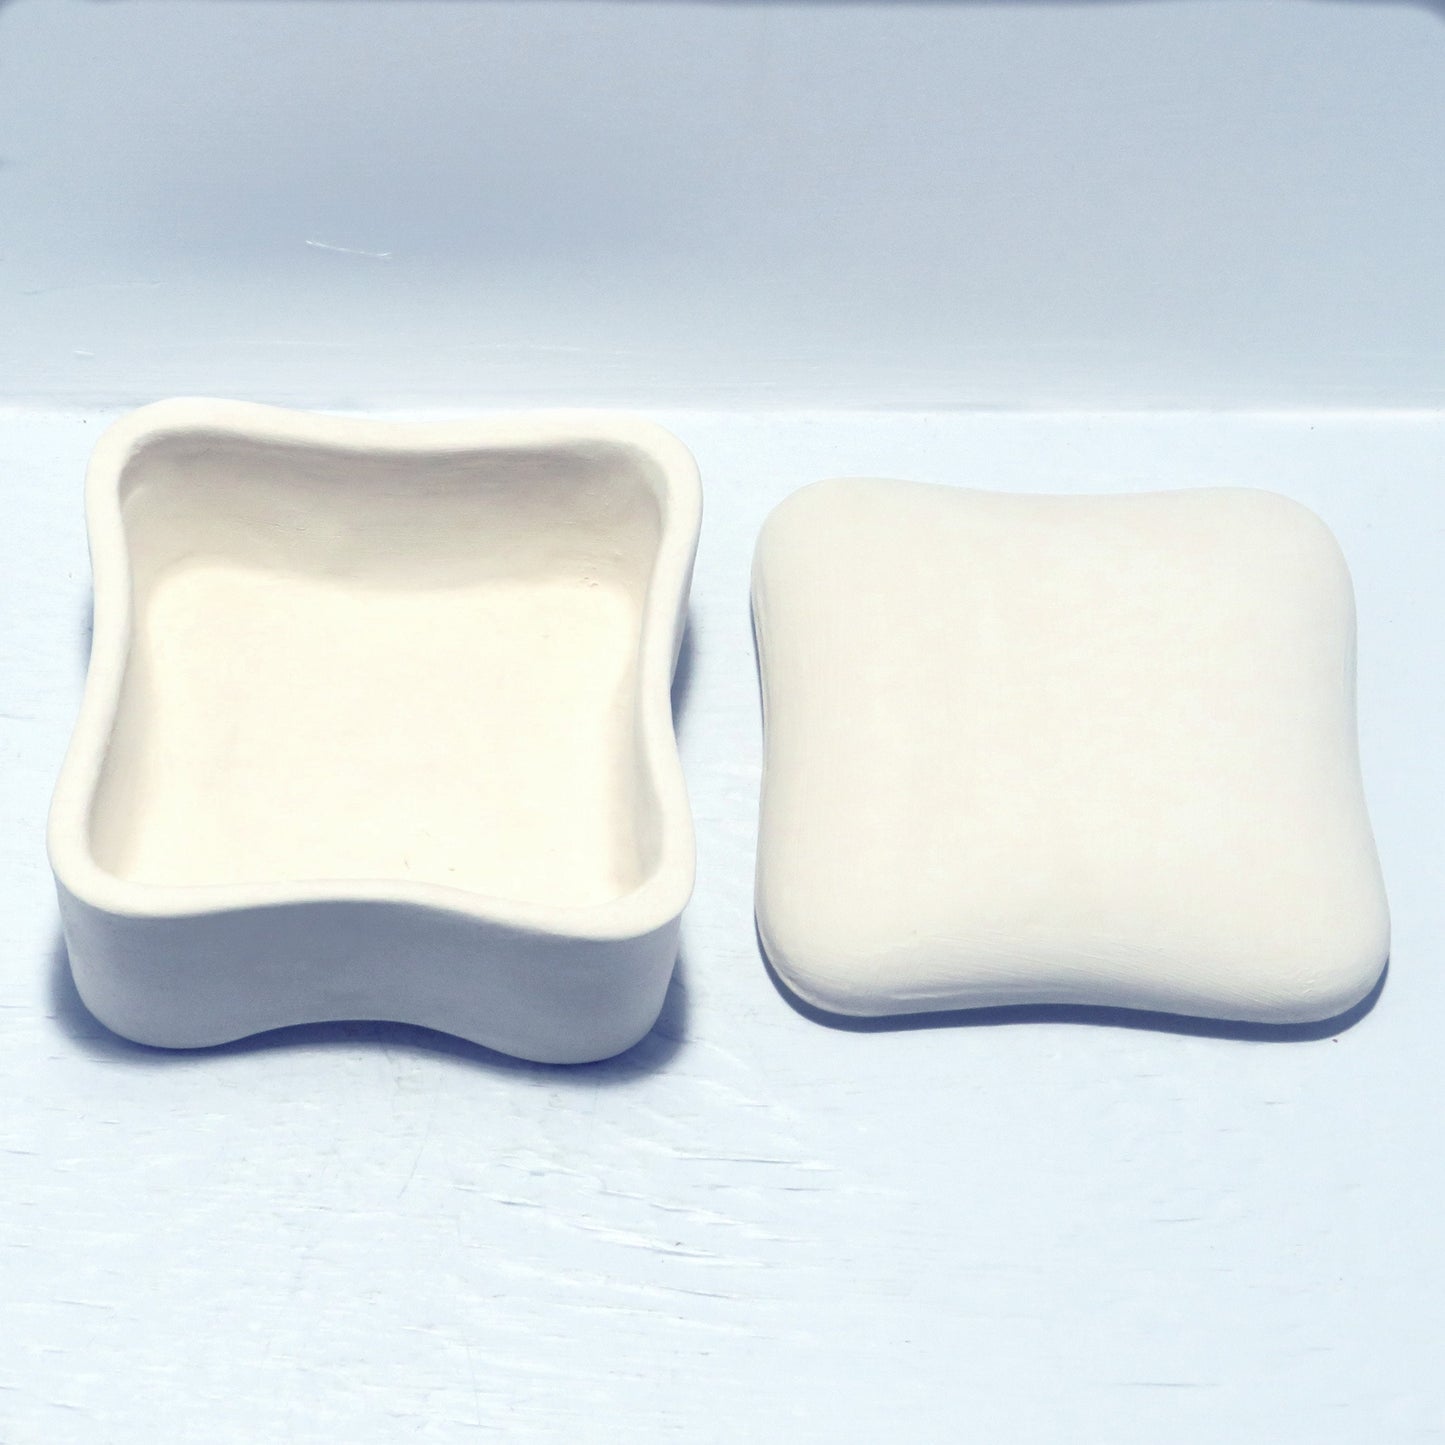 Handmade Ready to Paint Square Trinket Dish with Lid / Ceramics To Paint / Paintable Ceramic Jewelry Dish / Gift For Her / Paint it Yourself